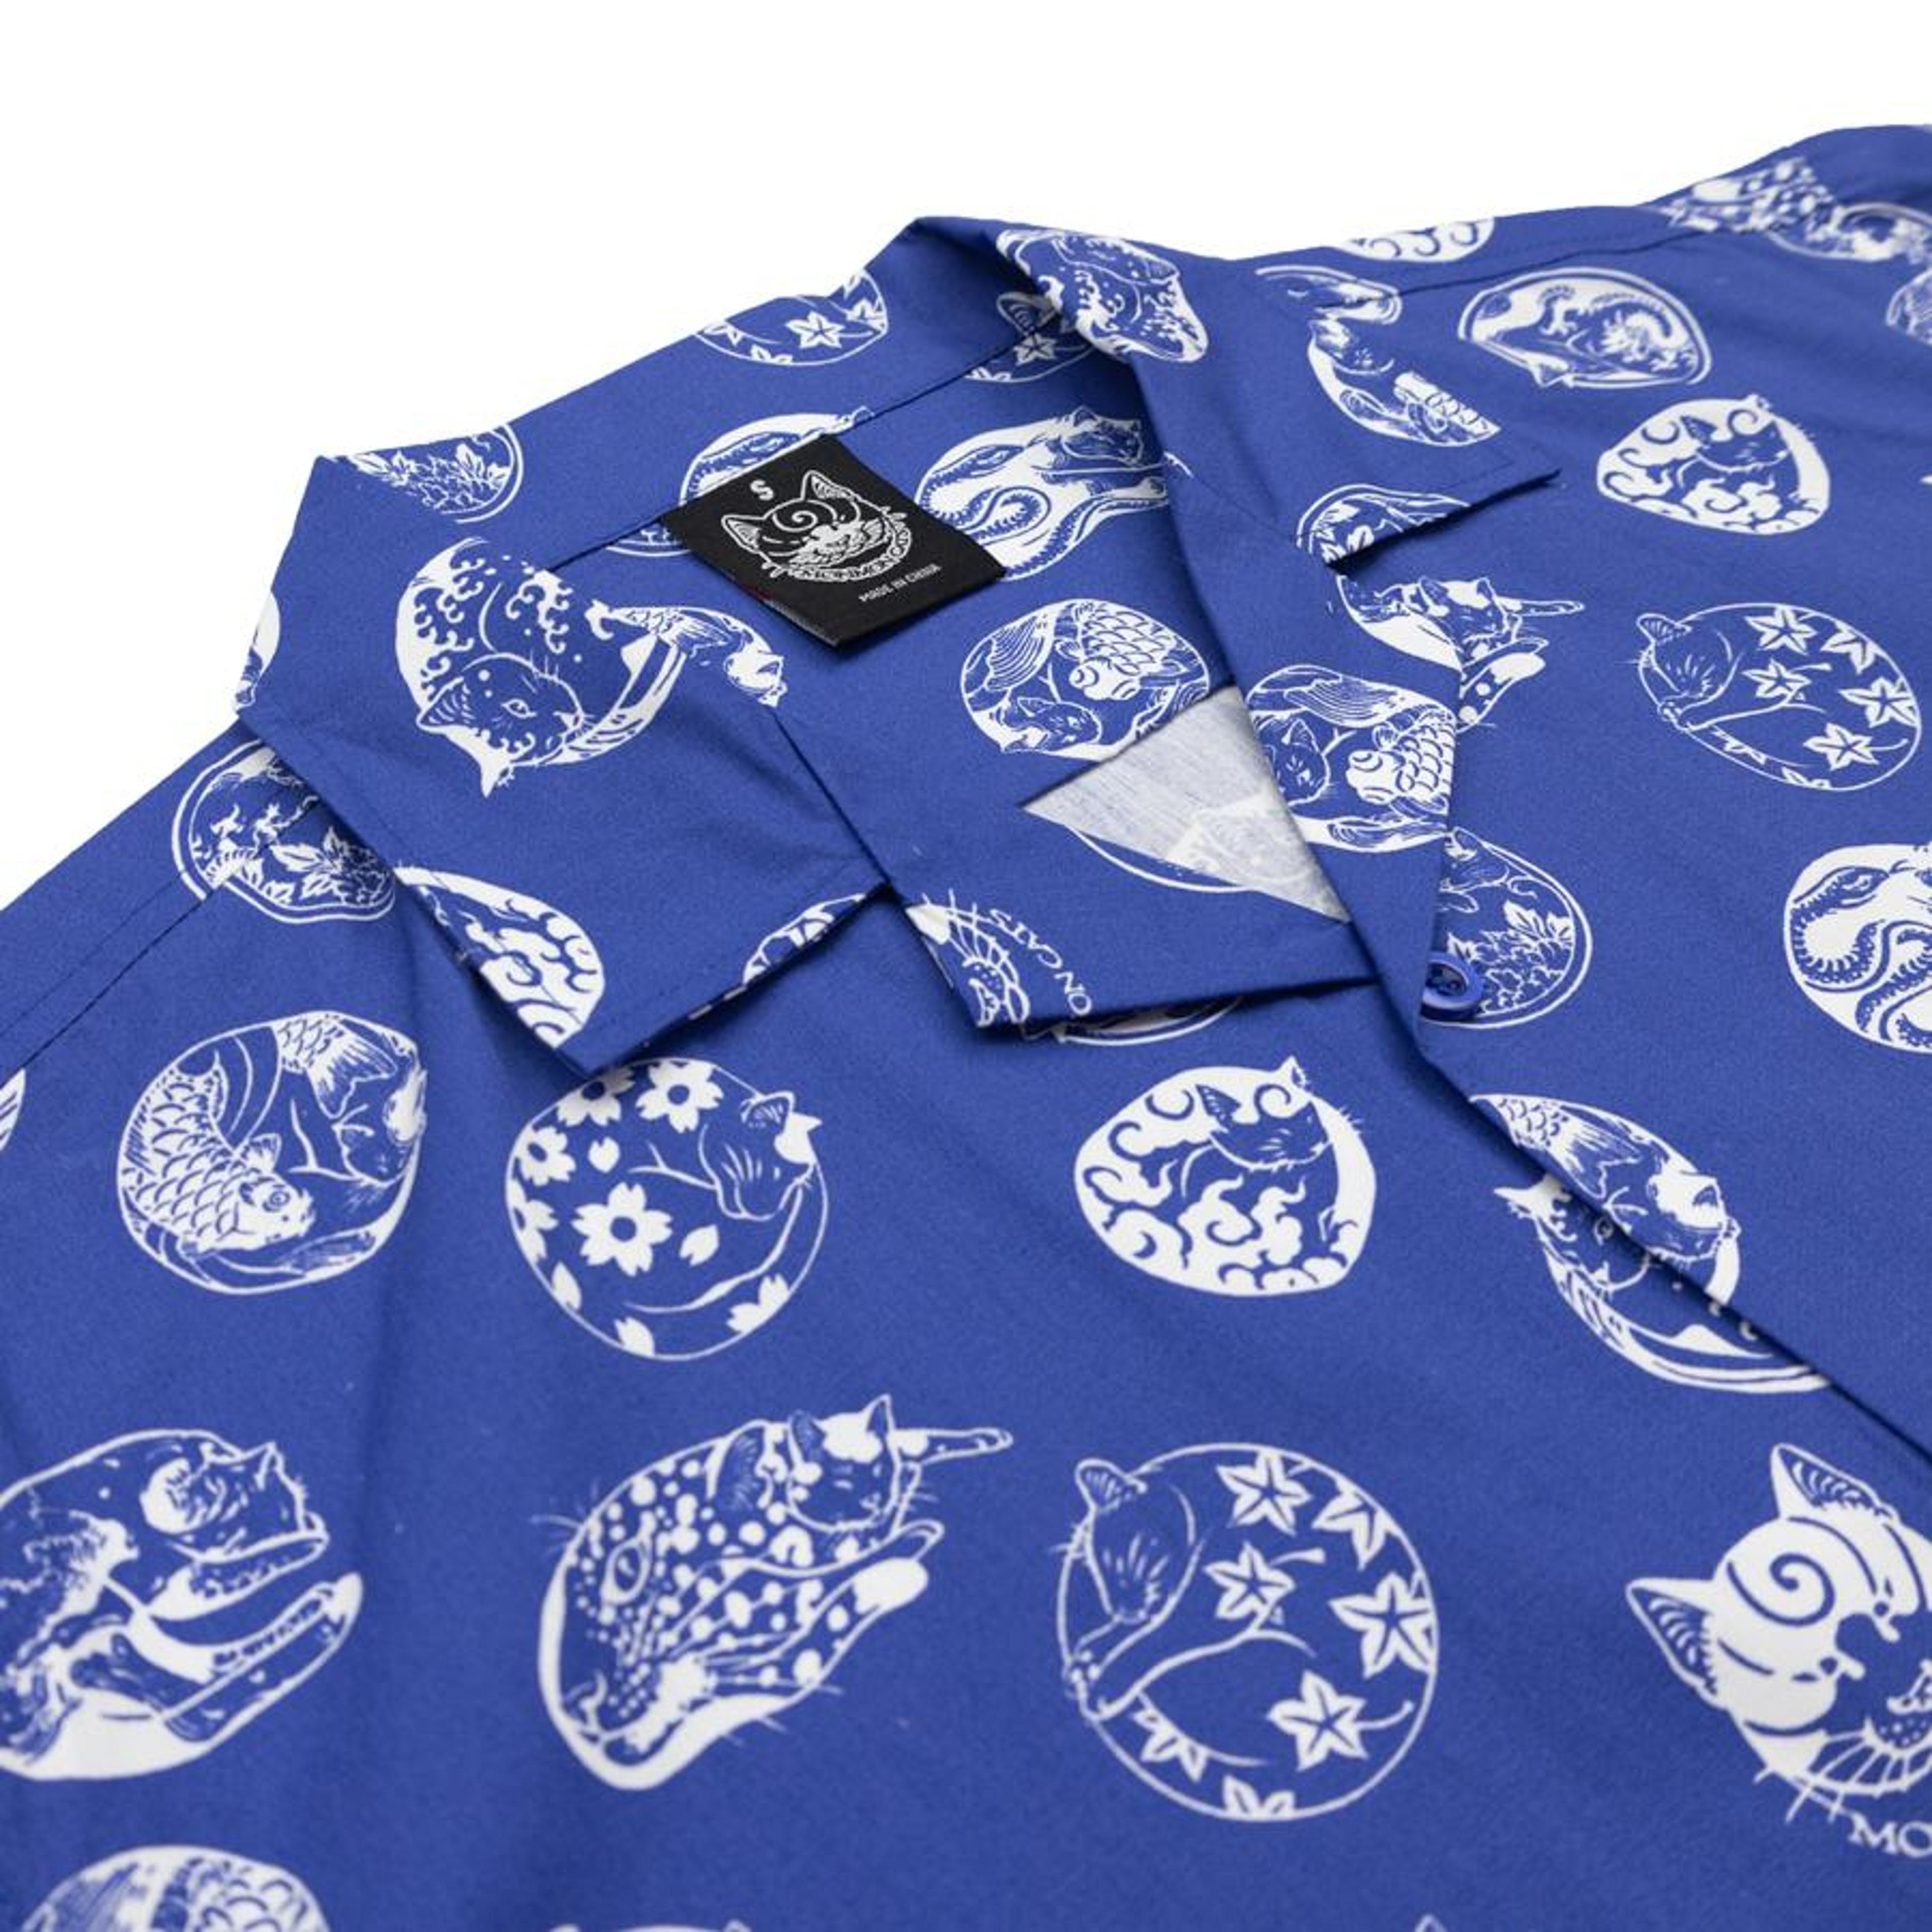 Alternate View 1 of Curled Cat Vacation Shirt